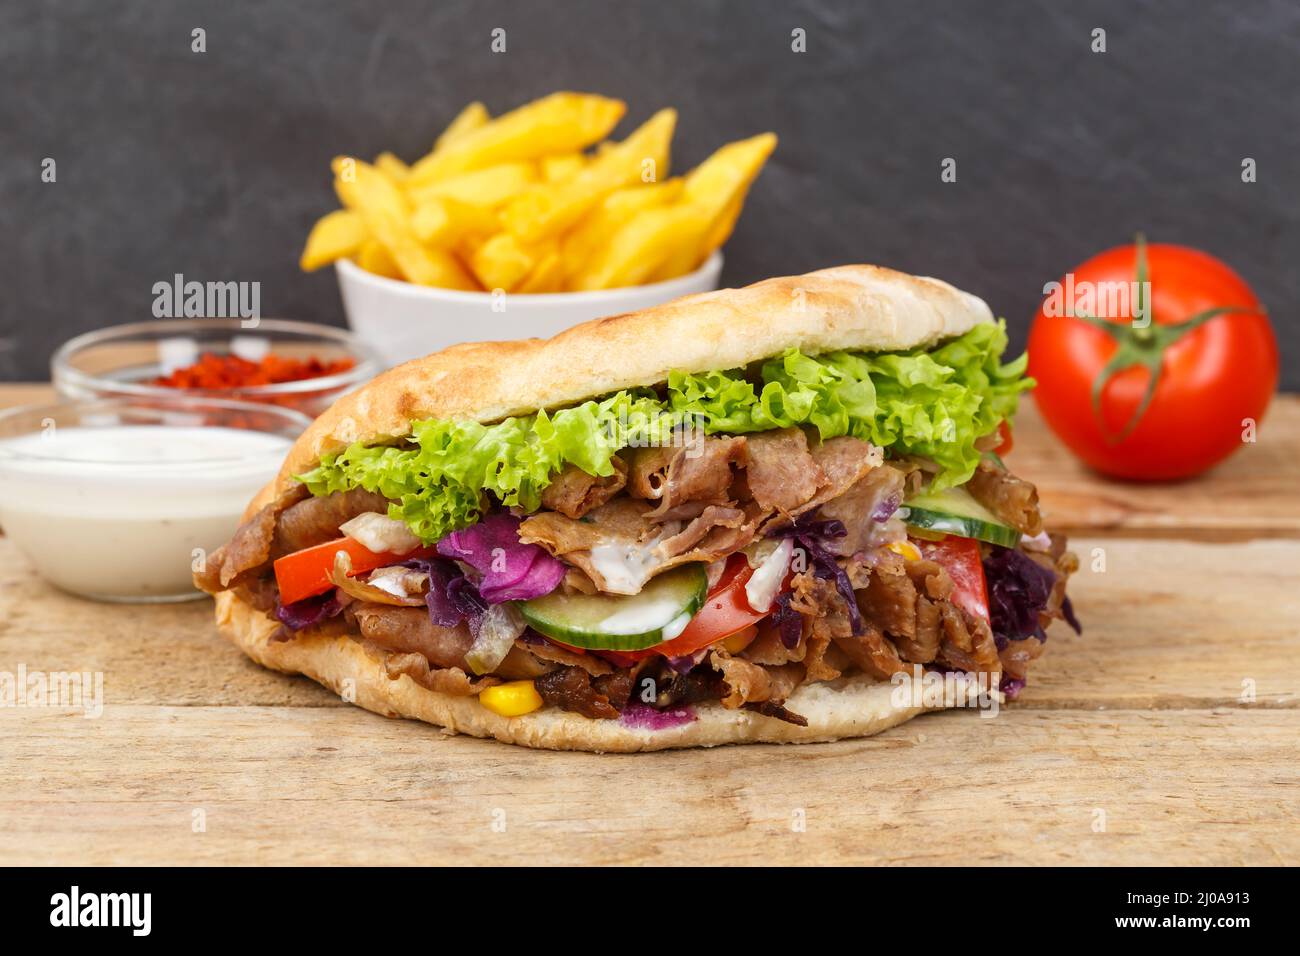 Döner Kebab Doner Kebap fast food in flatbread with fries on a wooden board snack Stock Photo